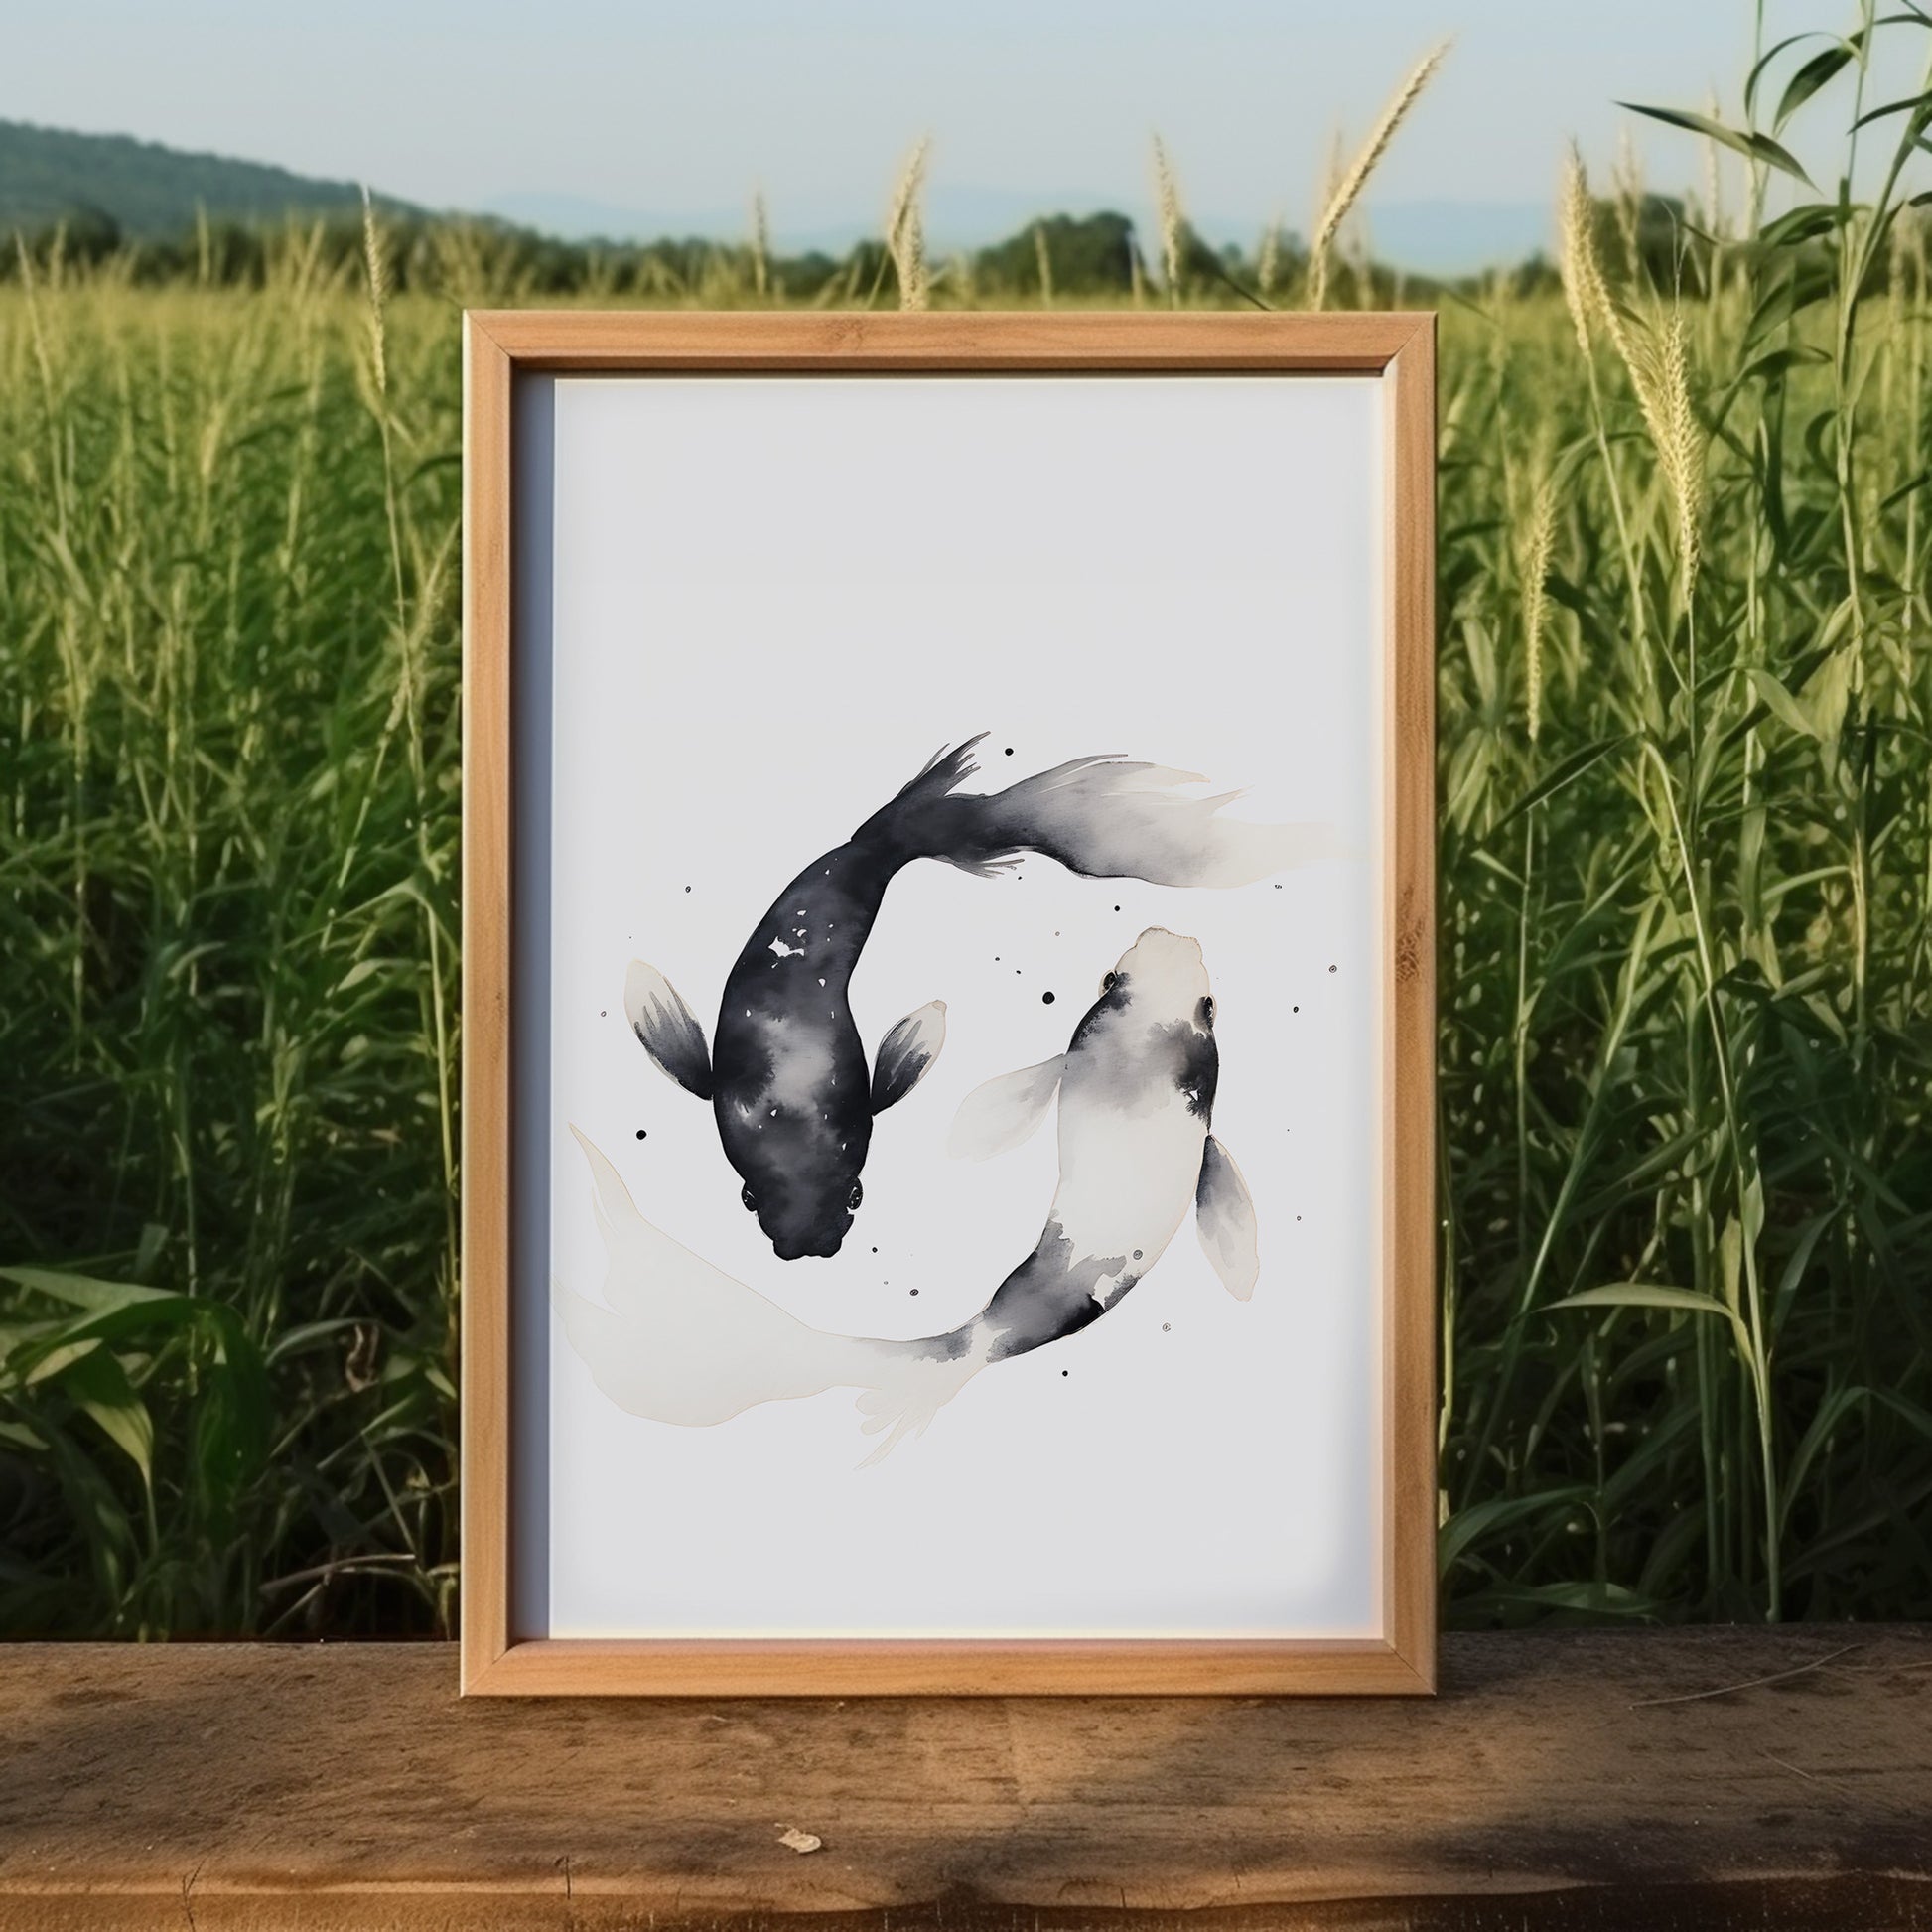 A framed illustration of two koi fish on a table with a field in the background.